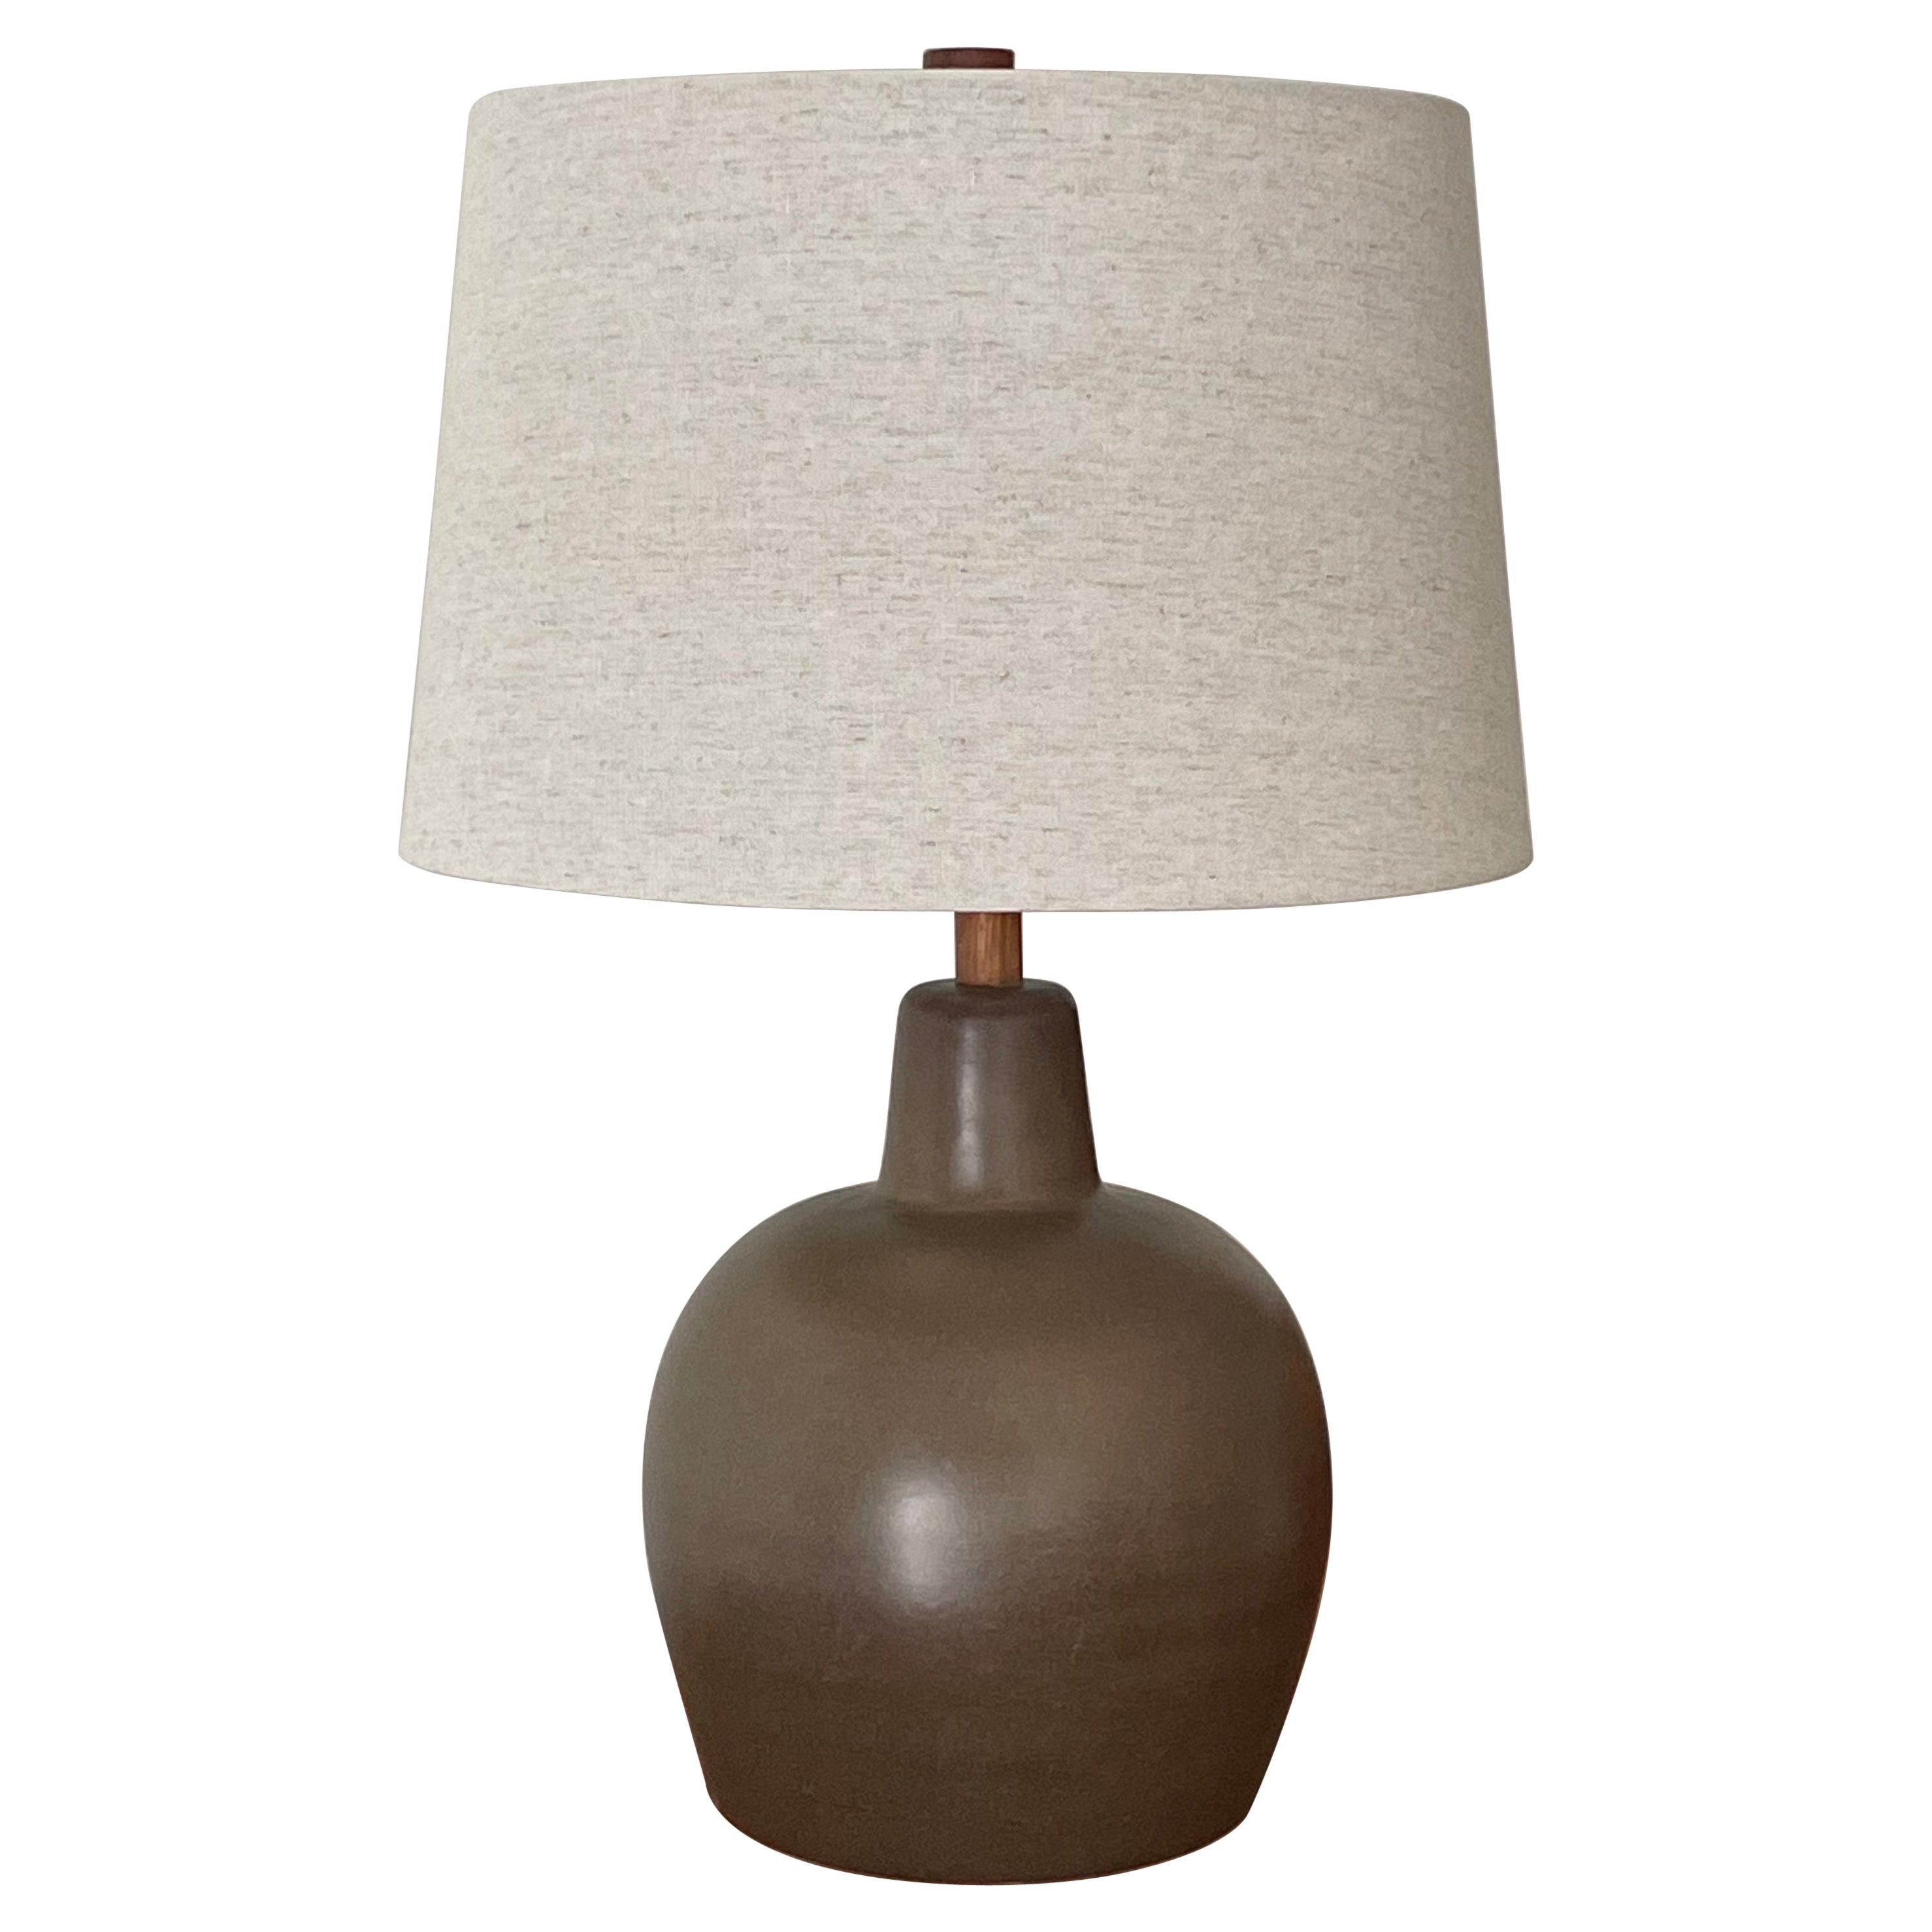 Jane and Gordon Martz Table Lamp, Ceramic and Walnut For Sale